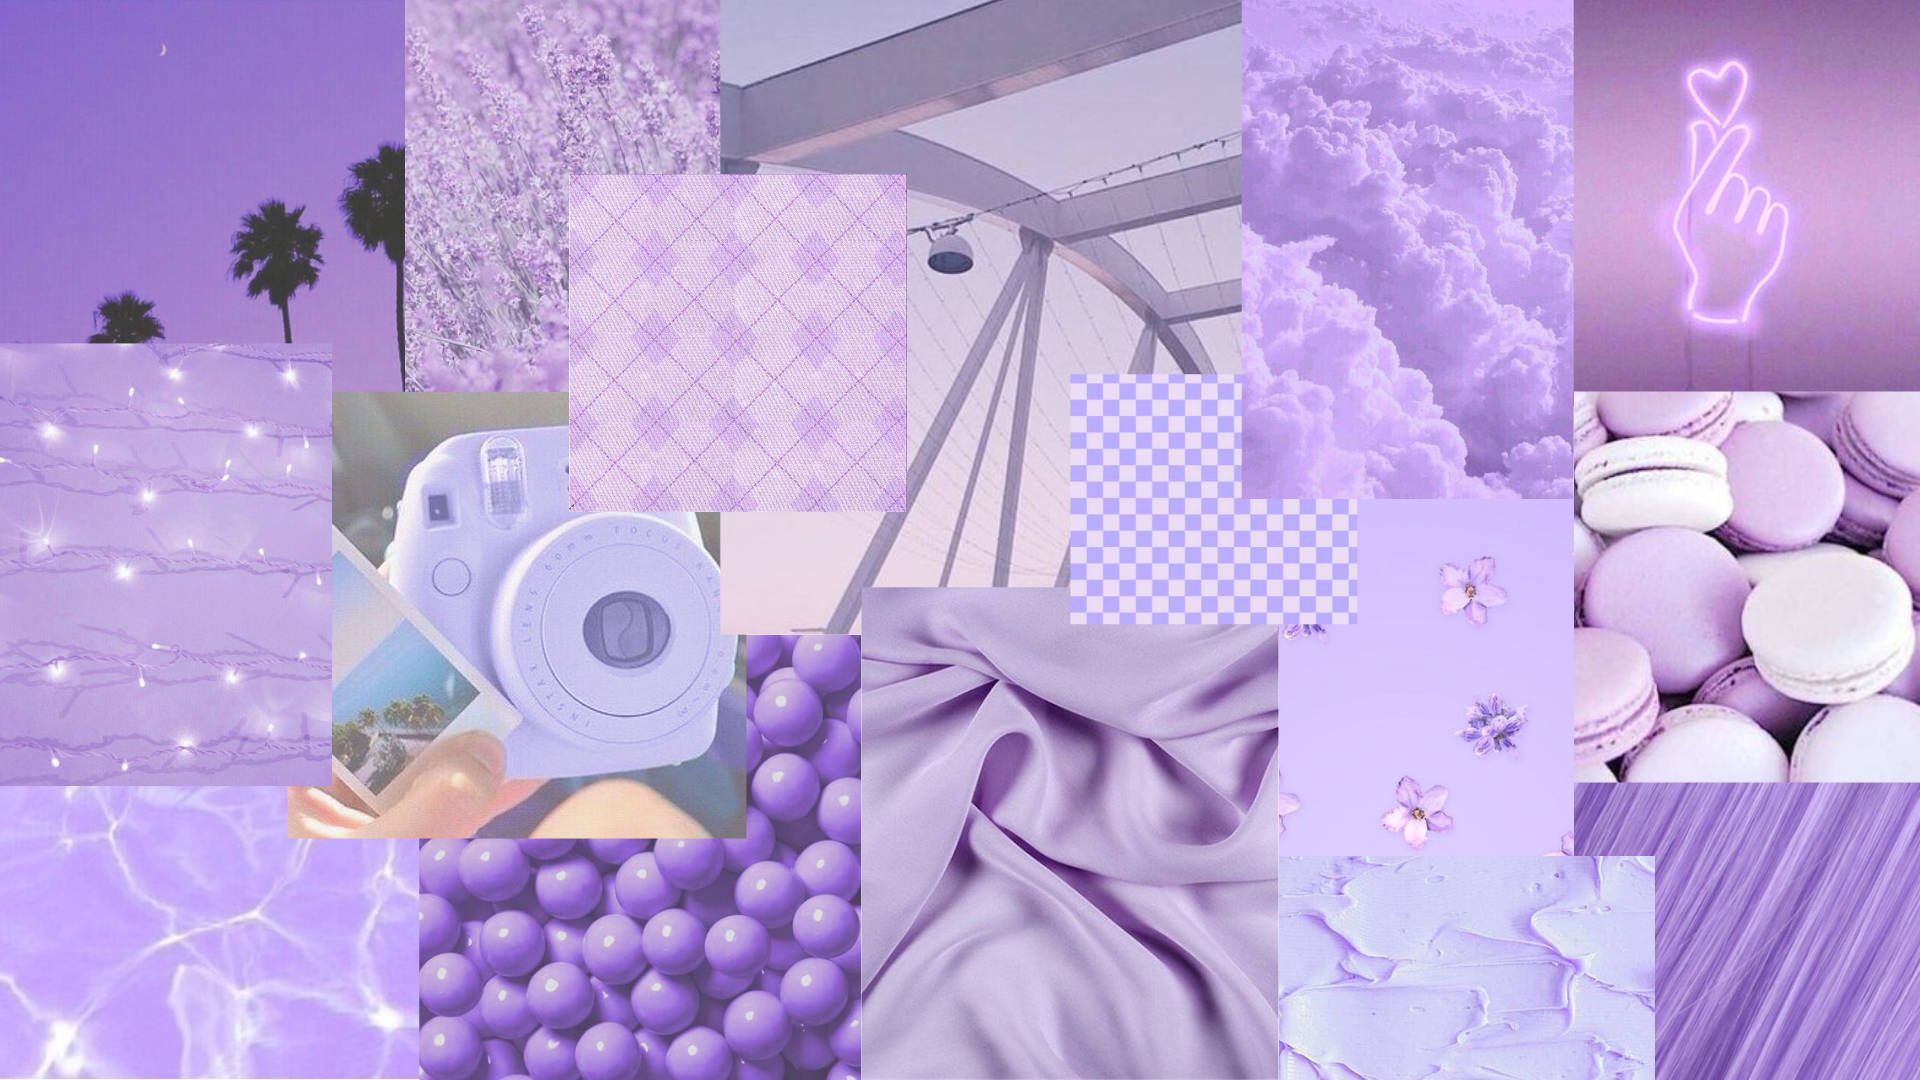 Aesthetic purple background with a variety of images - Purple